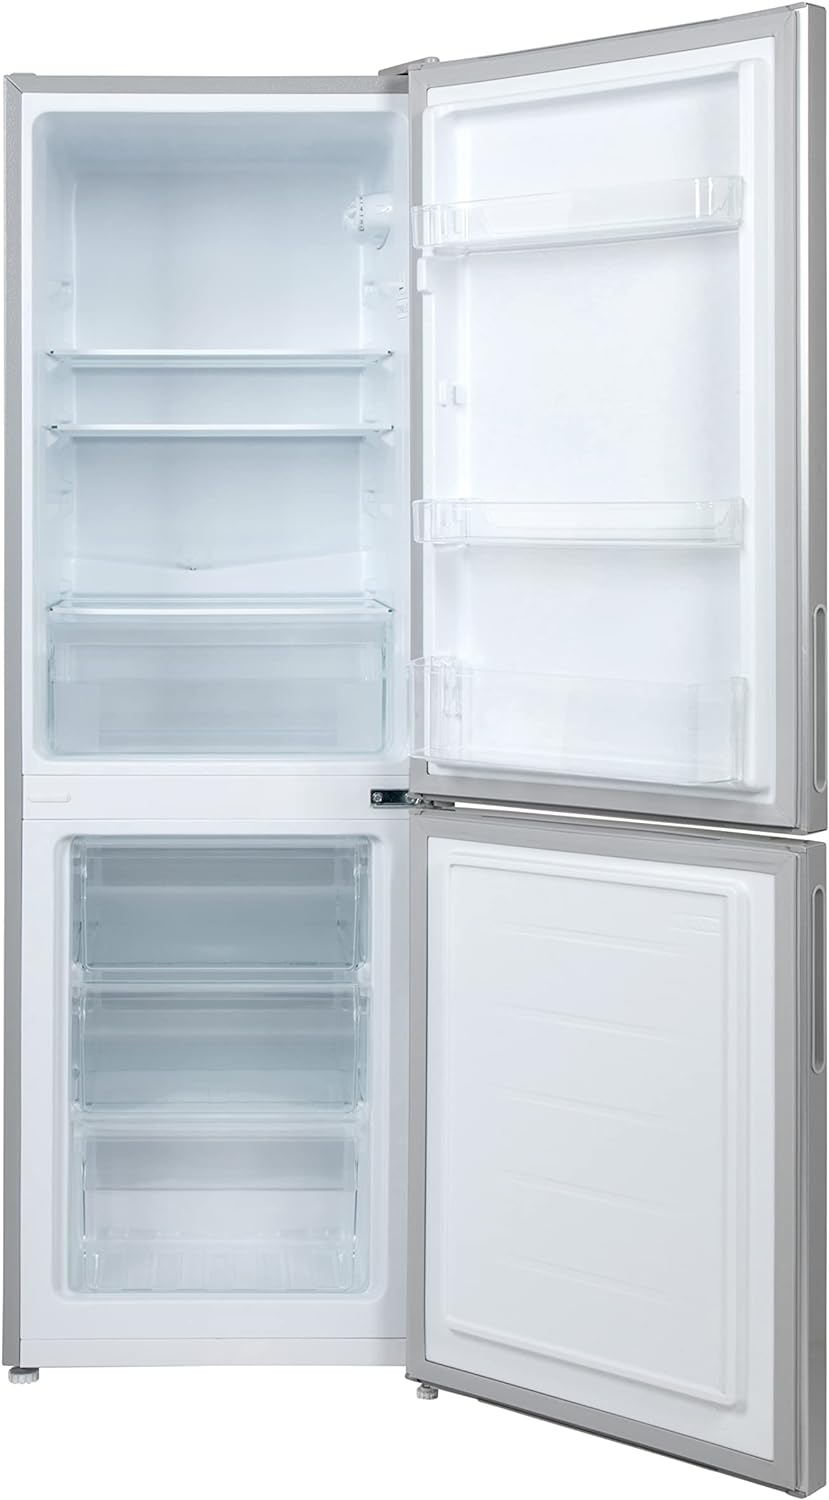 Willow WFF157S 157L Freestanding 70/30 Fridge Freezer with Adjustable Thermostat, Mark - Proof Finish, Low Frost, 2 Year Warranty - Silver - Amazing Gadgets Outlet